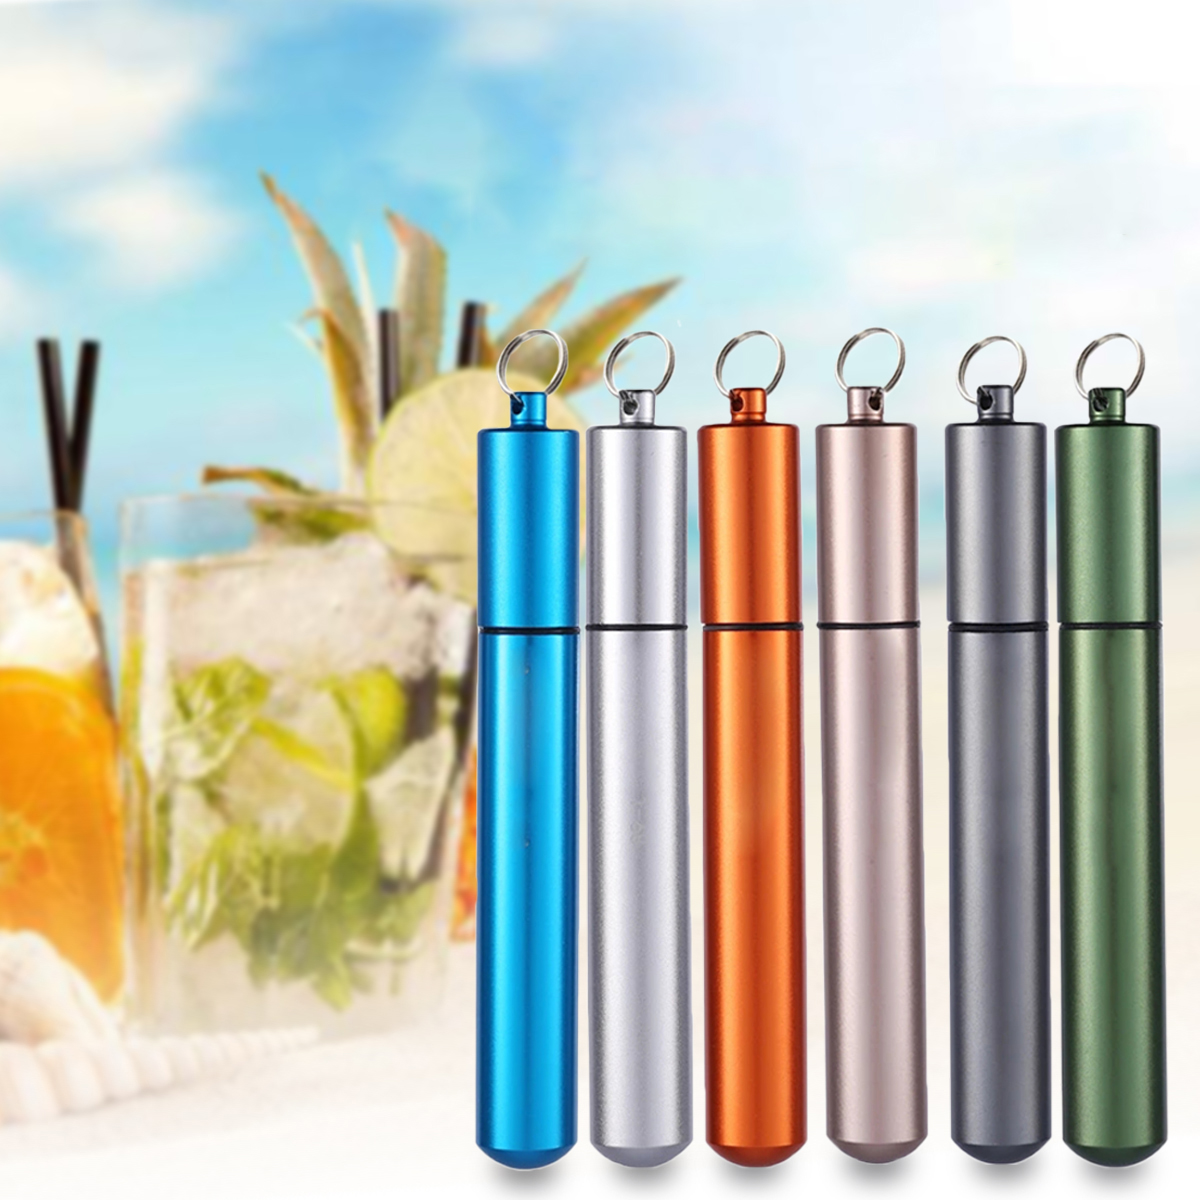 

Stainless Steel Retractable Straws Reusable Portable Drinking Straw Cleaning Brushes With Storage Box For Camping Travel Picnic